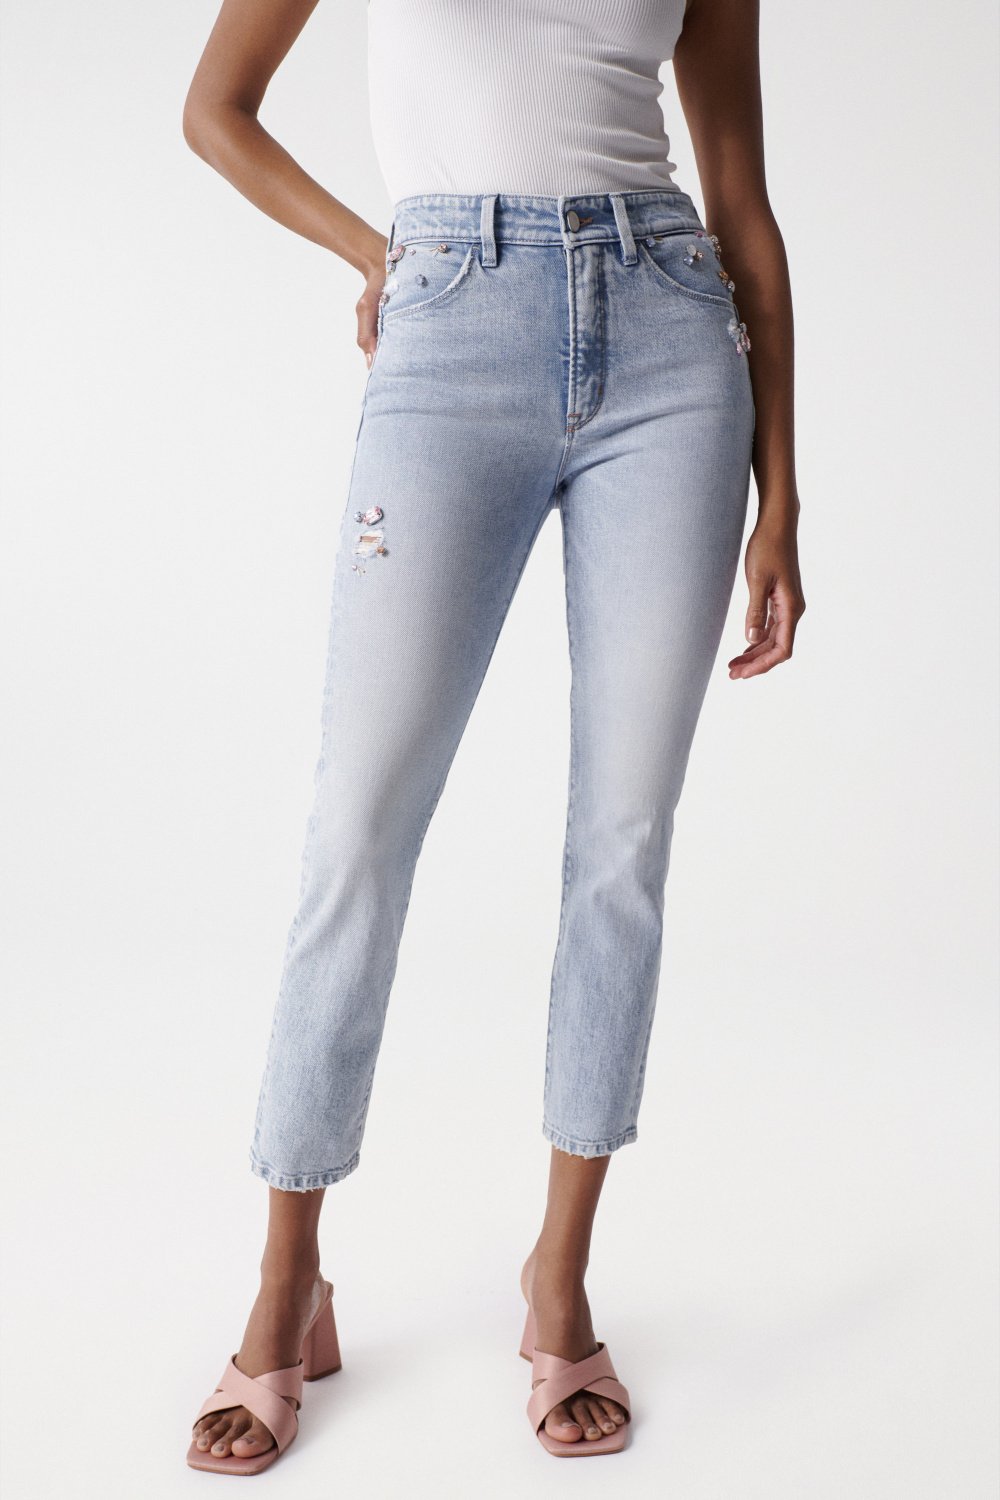 LIMITED EDITION CROPPED SLIM FAITH PUSH IN JEANS - Salsa